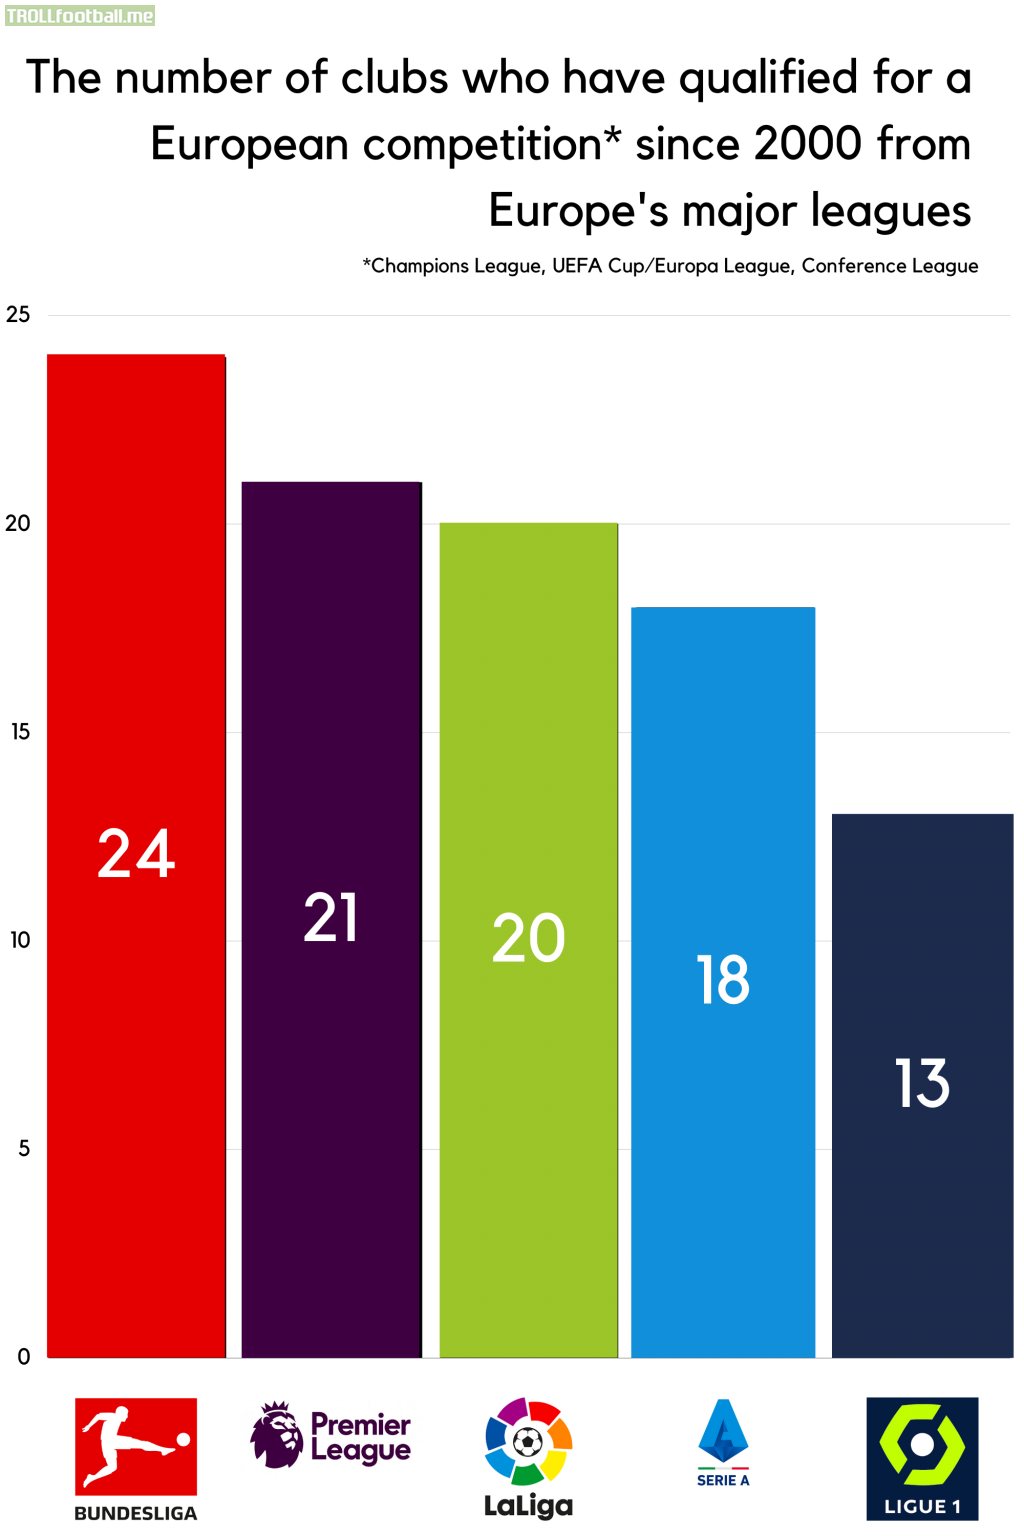 The number of clubs from the five major leagues who have qualified for a European competition since 2000. Germany (24), England (21), Spain (20), Italy (18), and France (13)